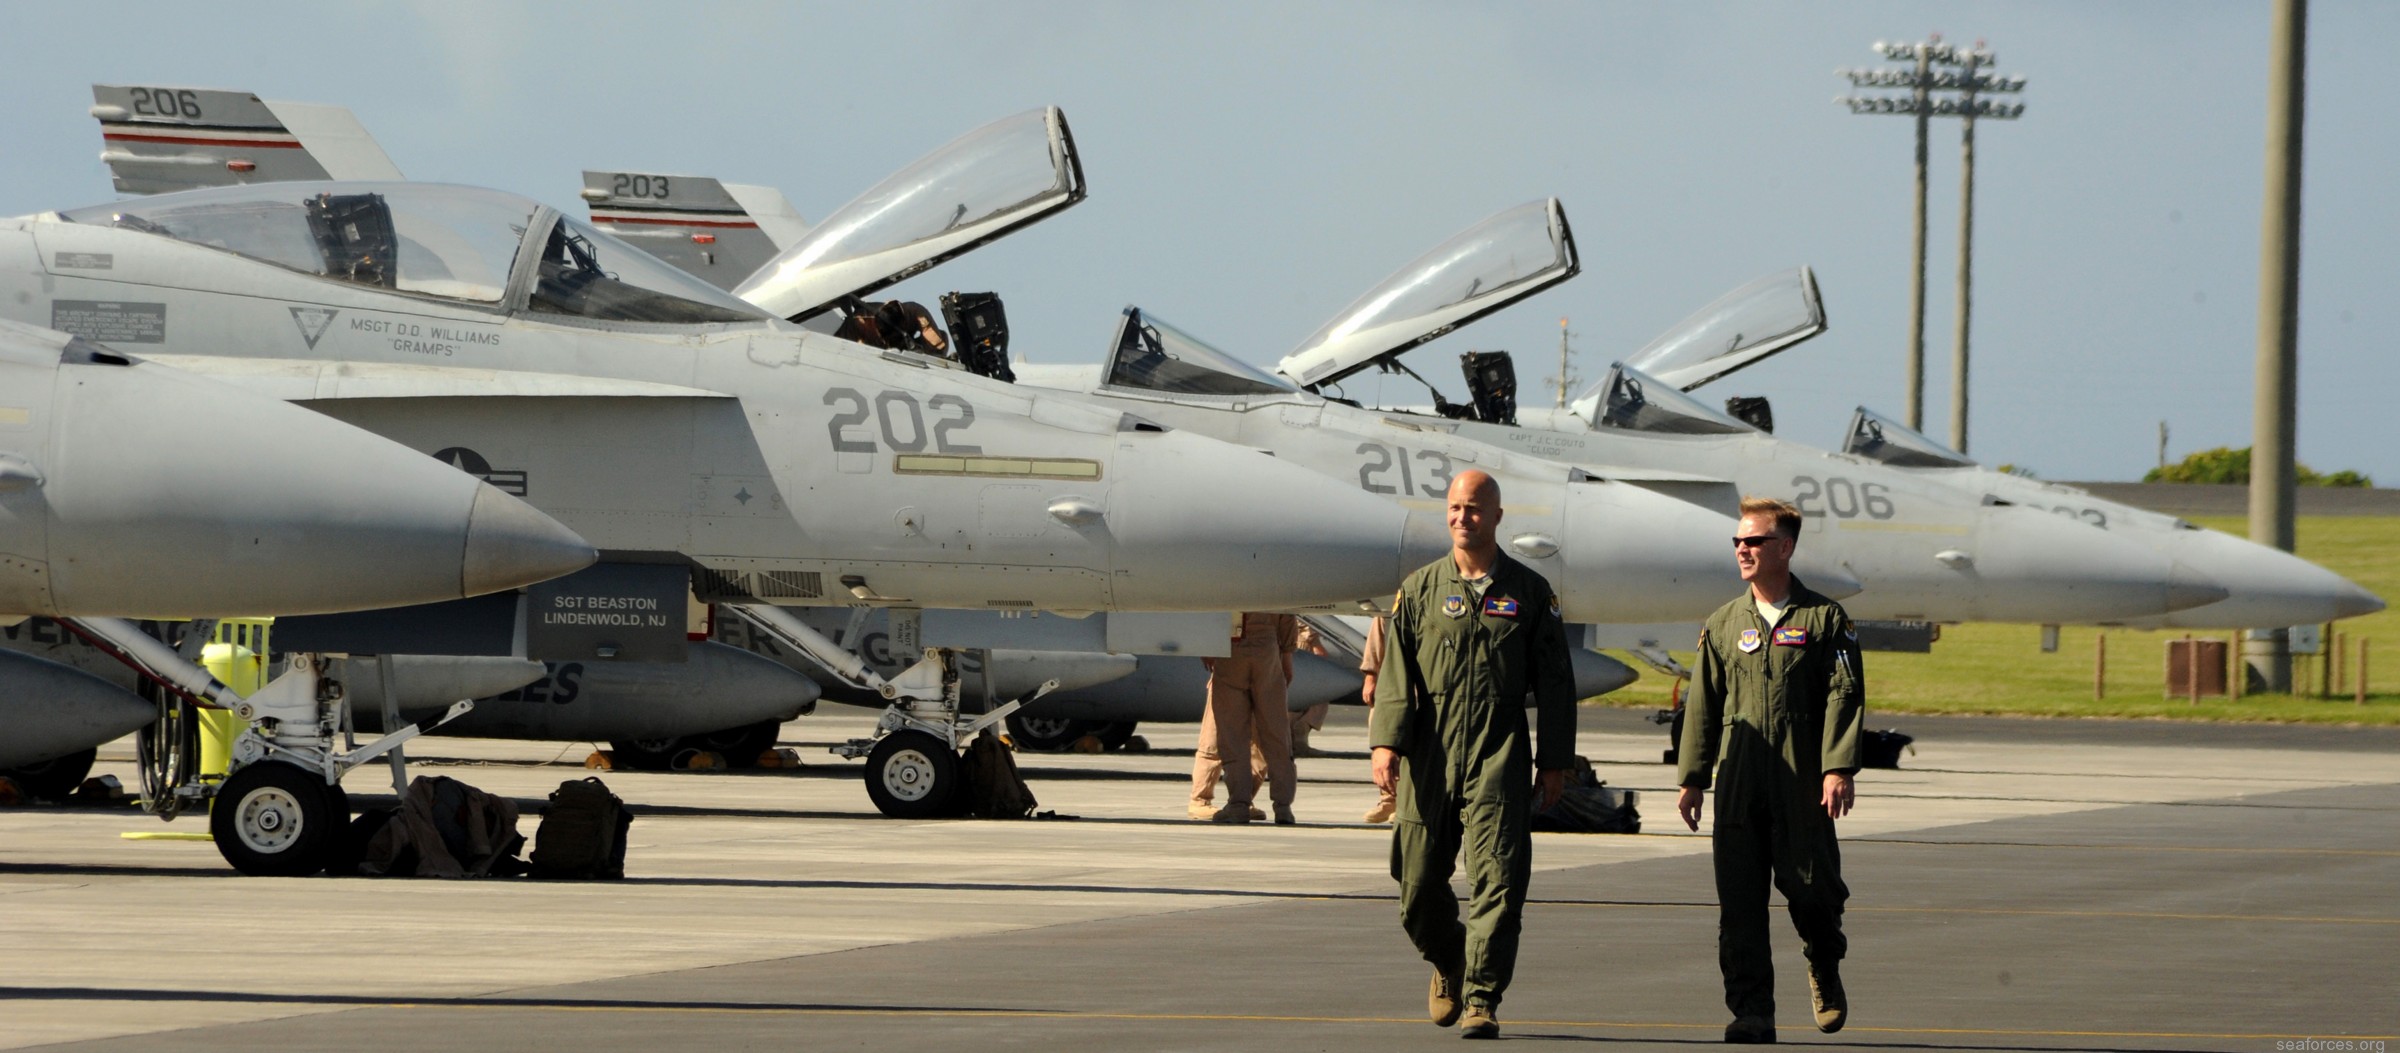 vmfa-115 silver eagles marine fighter attack squadron f/a-18a+ hornet 141 lajes airfield portugal